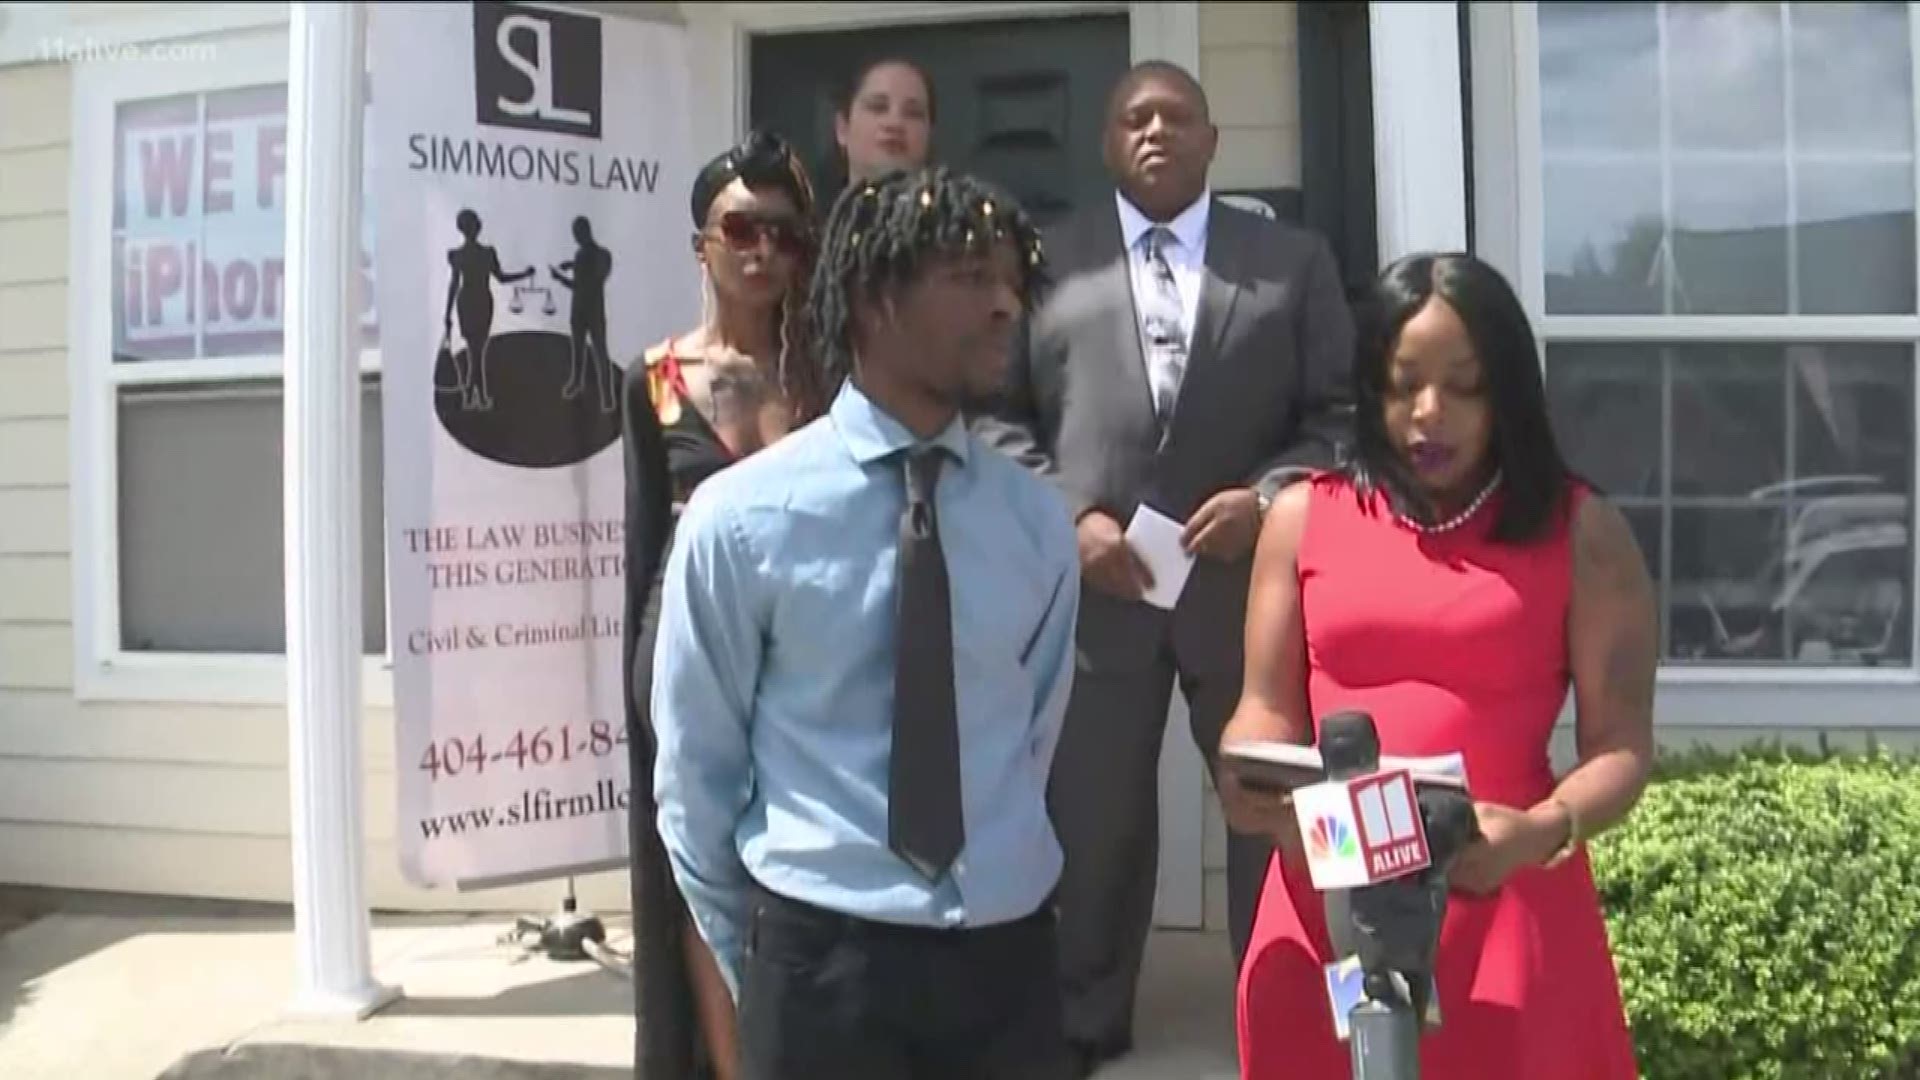 In a news conference, his attorney said they plan on filing a lawsuit.